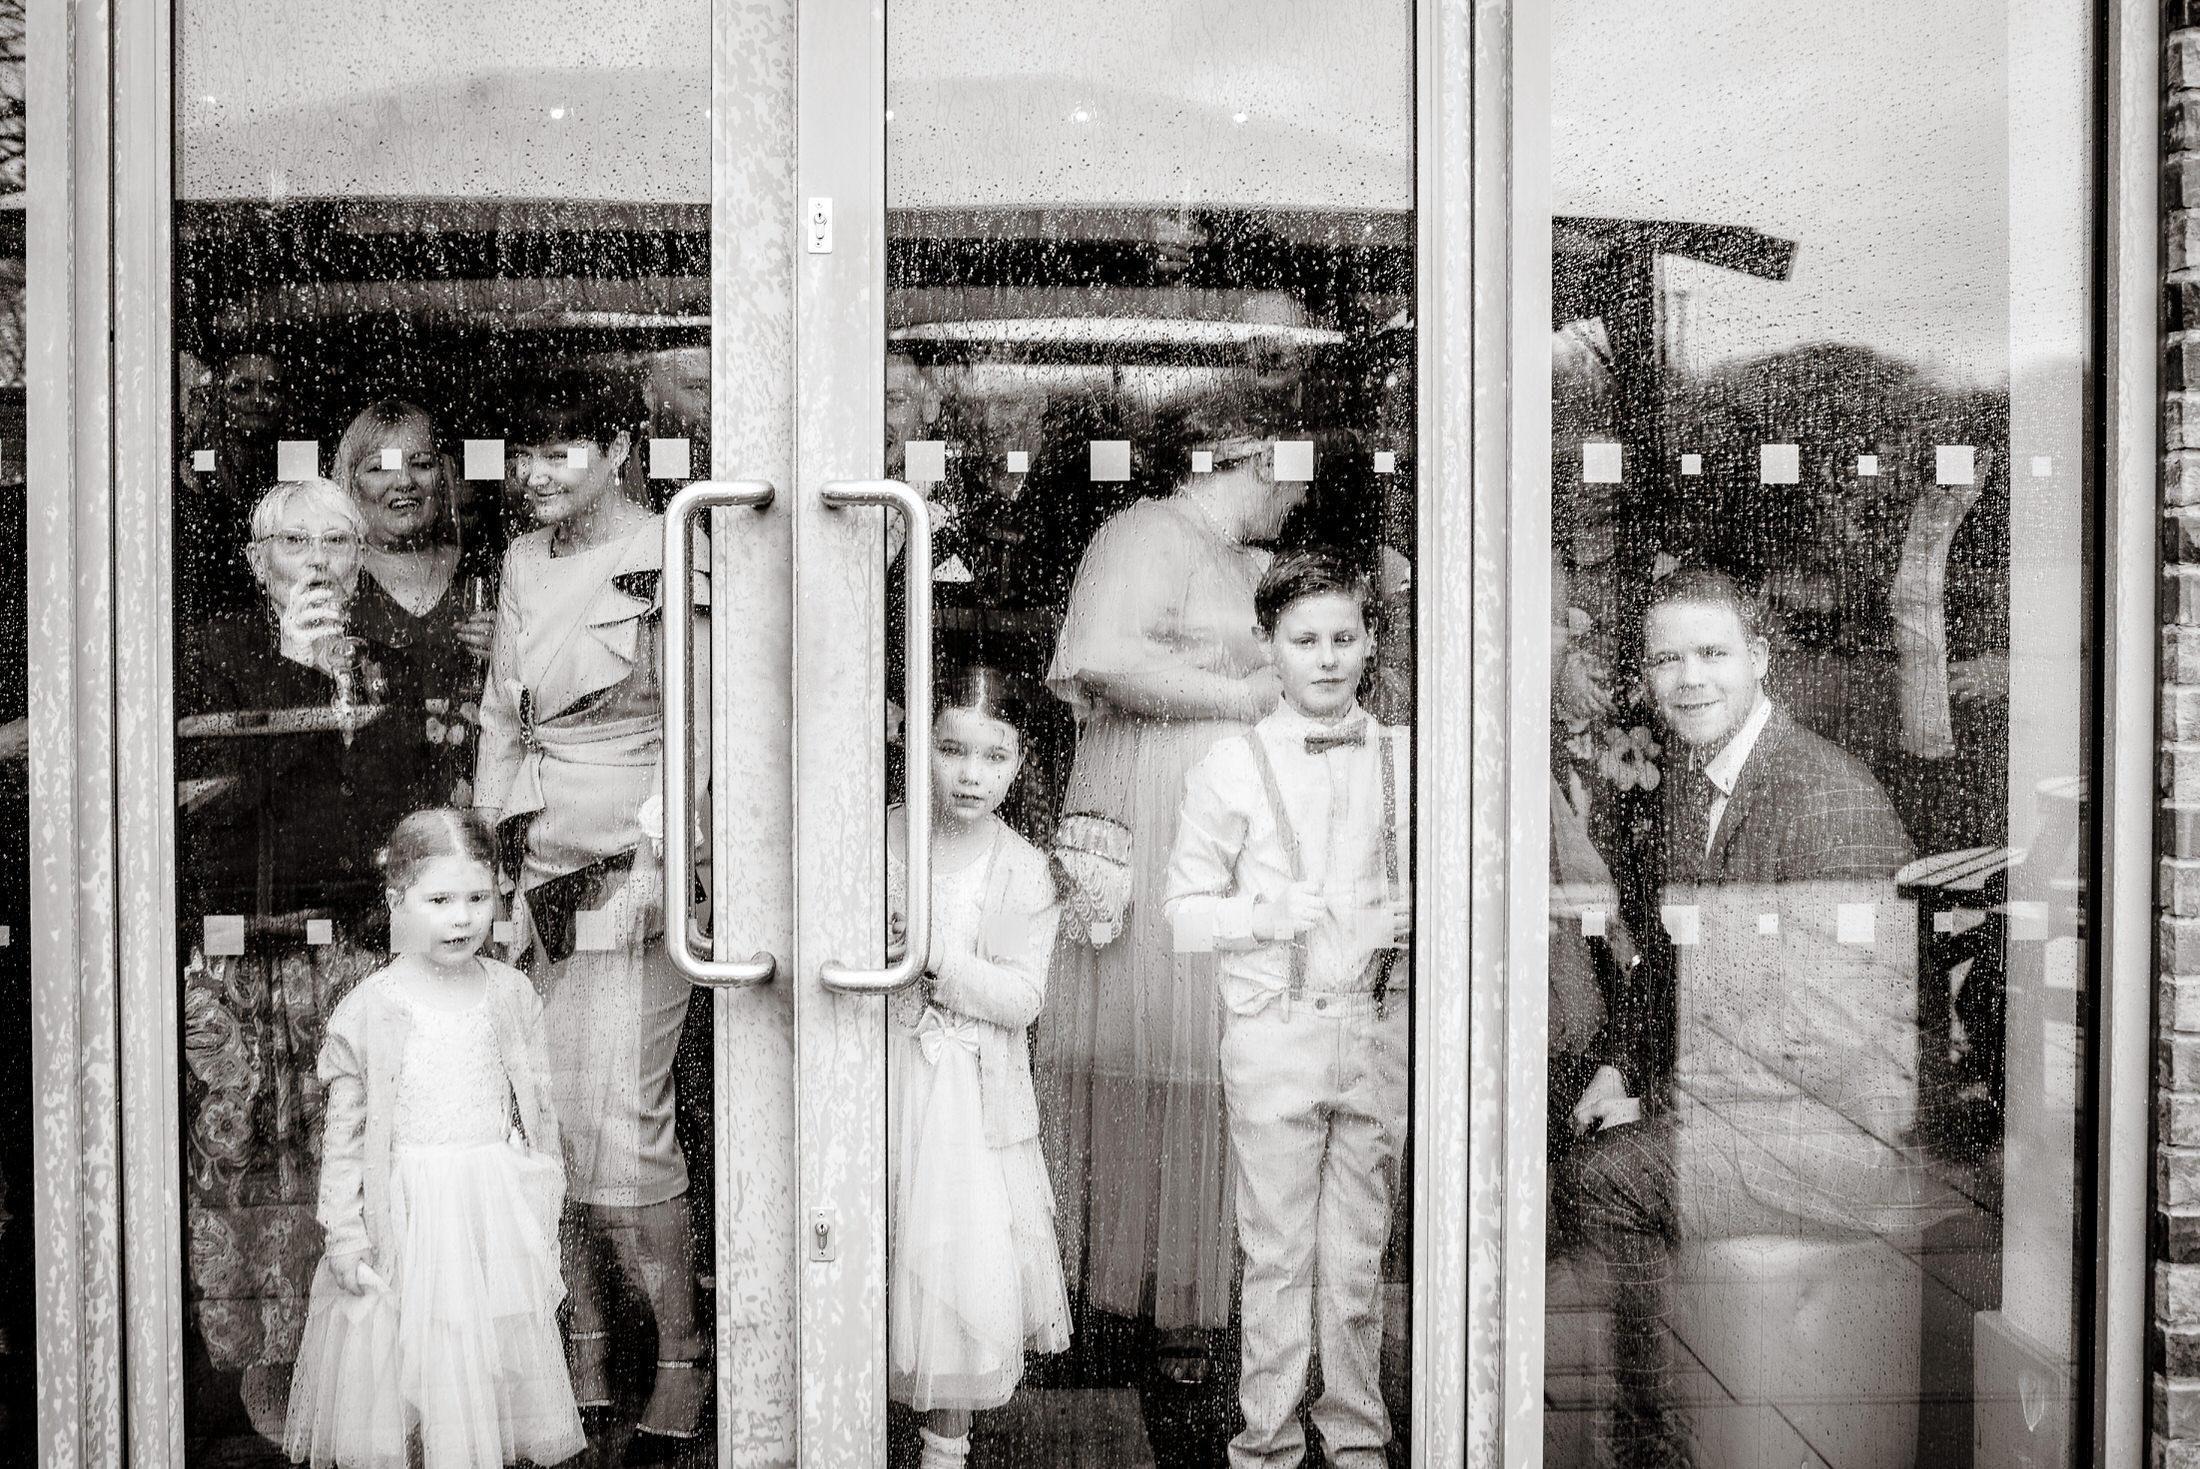 A group of people standing behind glass doors at the Brackenborough Hotel wedding.